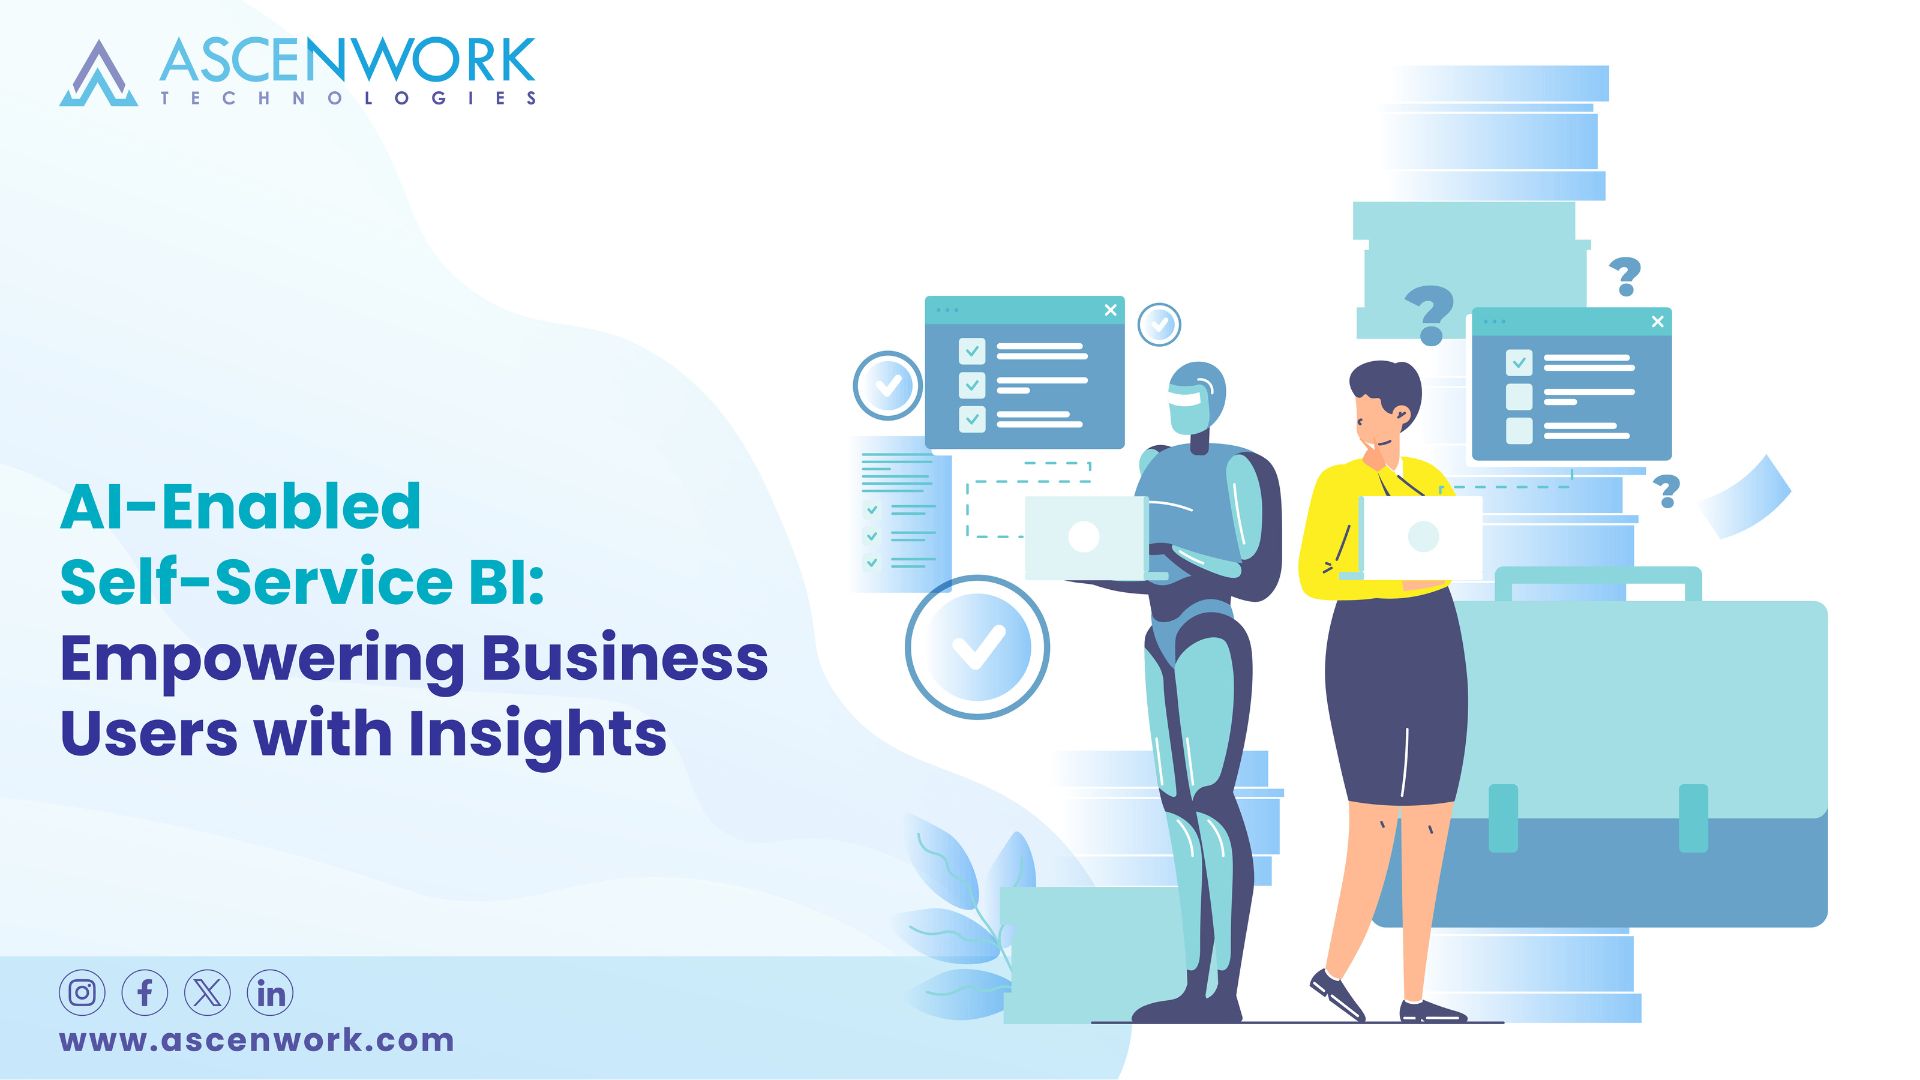 AI-Enabled Self-Service BI: Empowering Business Users with Insights